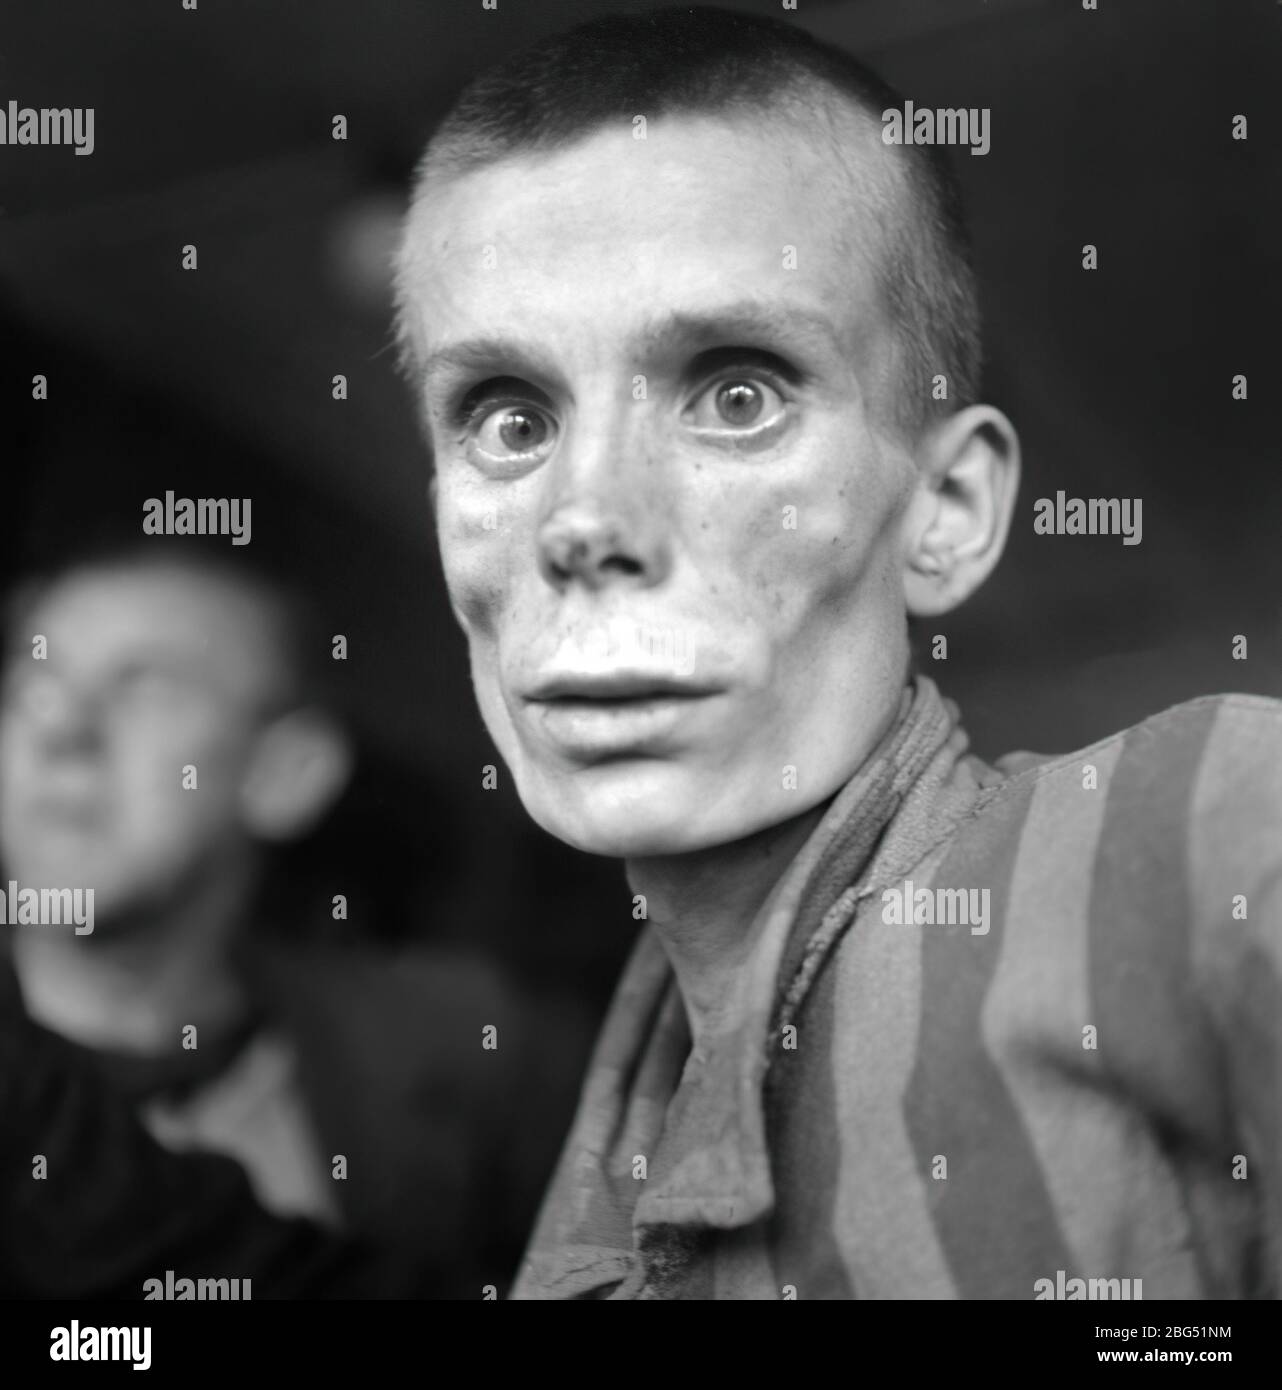 Second World War documentary. prisoner of the Dachau concentration camp soon after its liberation by U.S. forces in April 1945. Stock Photo